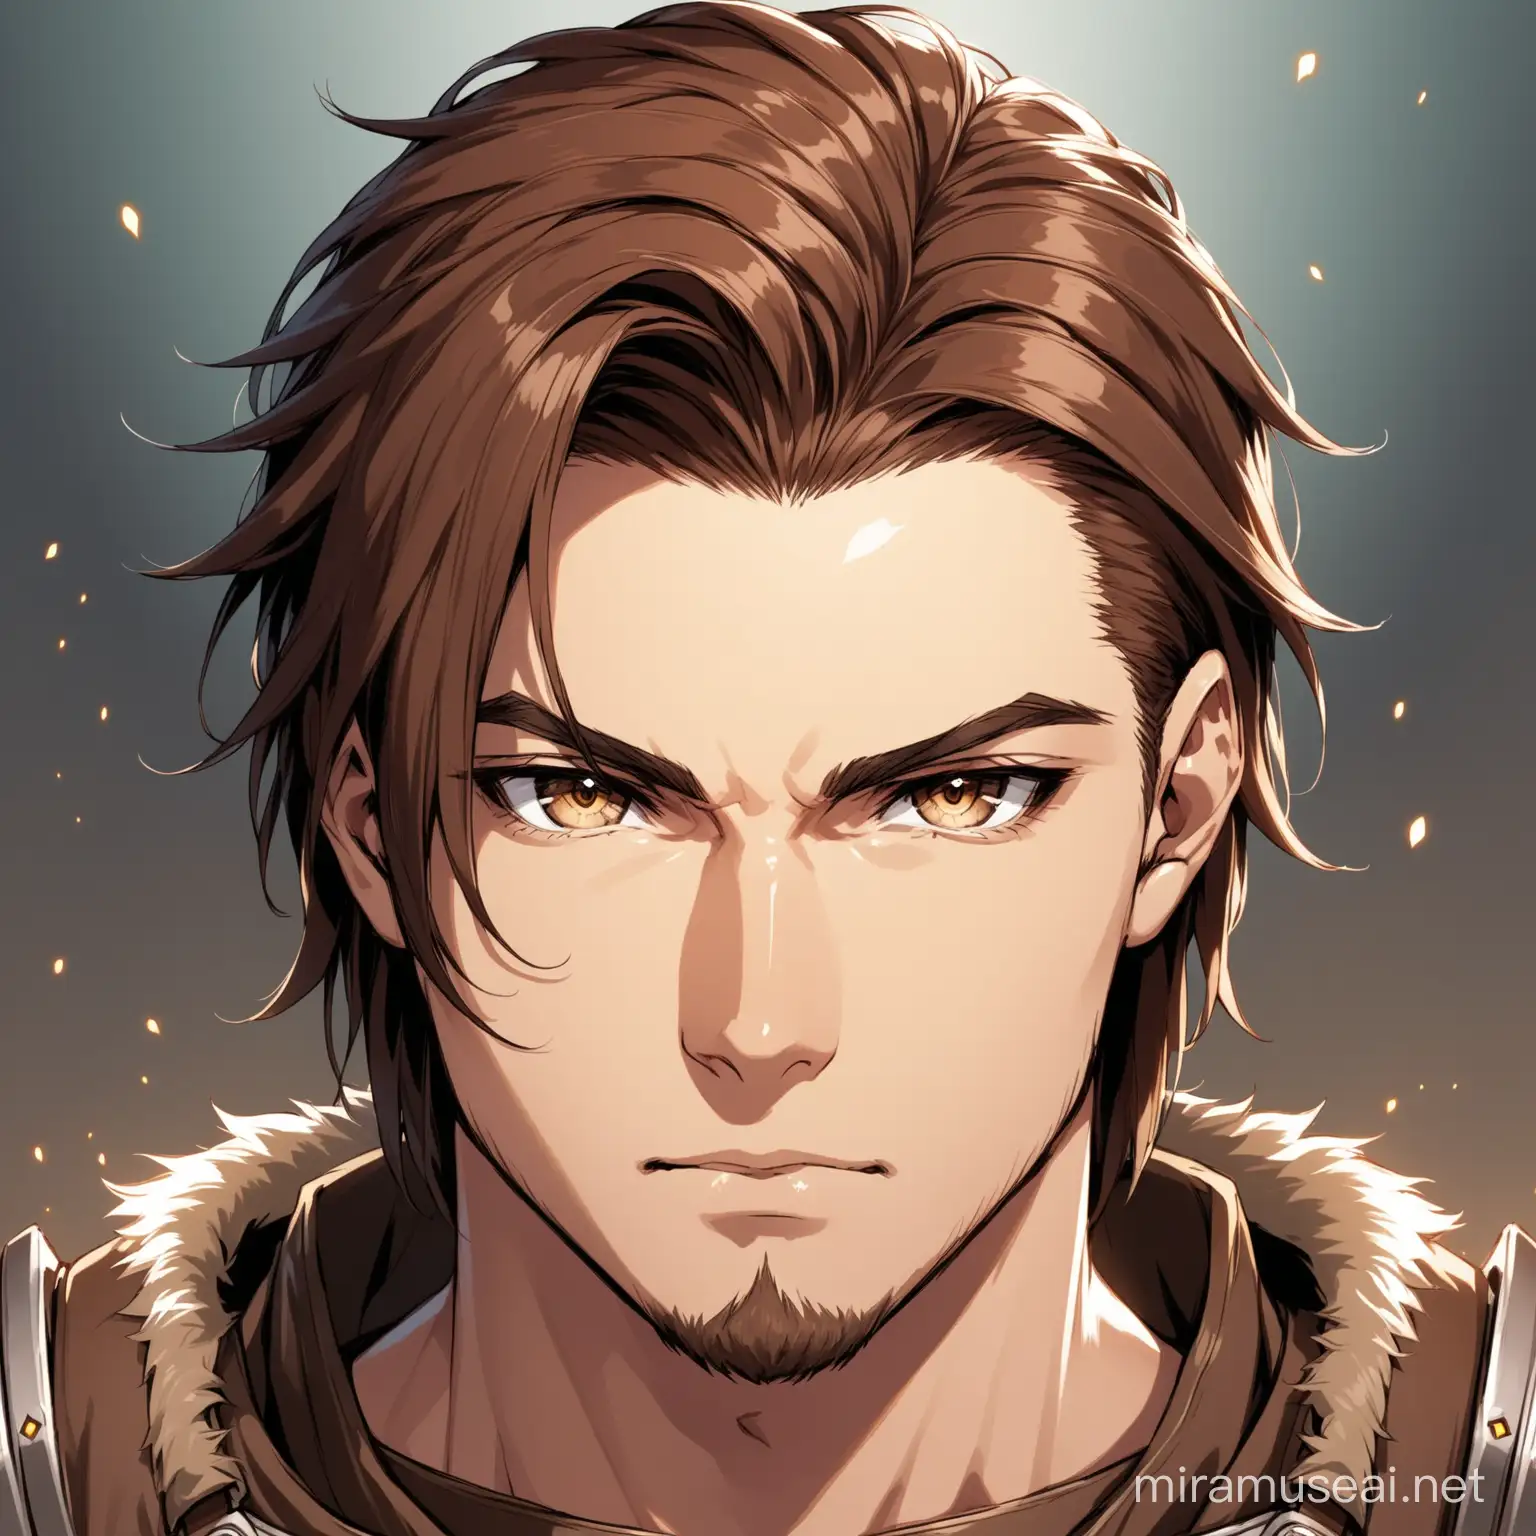 Strong Masculine Warrior Man with Brown Hair and Intense Gaze